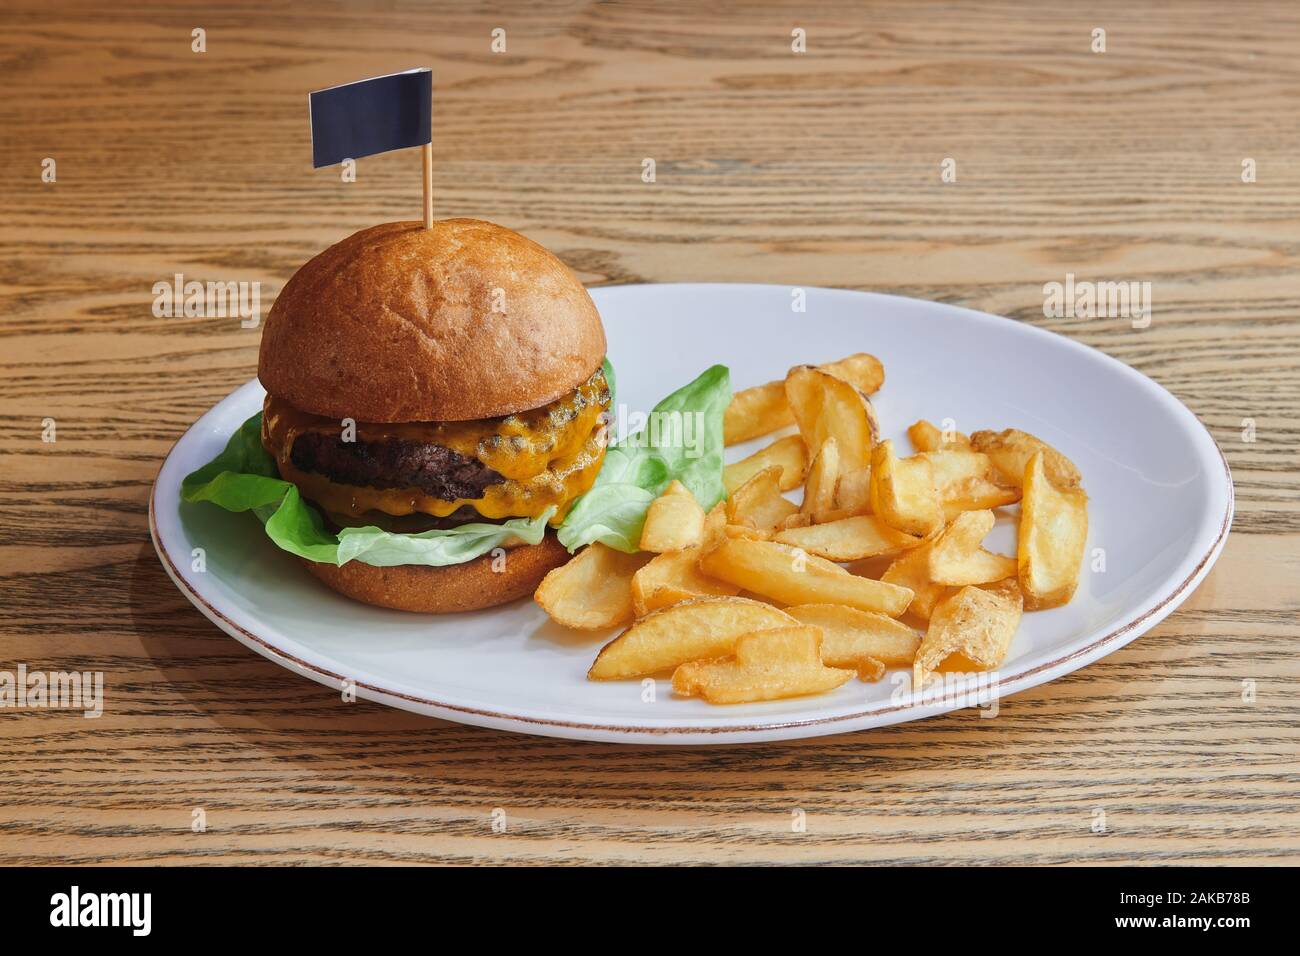 Double beef burger with double cheese and salad. Served with potato dippers on the wooden table in the white plate. American cuisine. Stock Photo